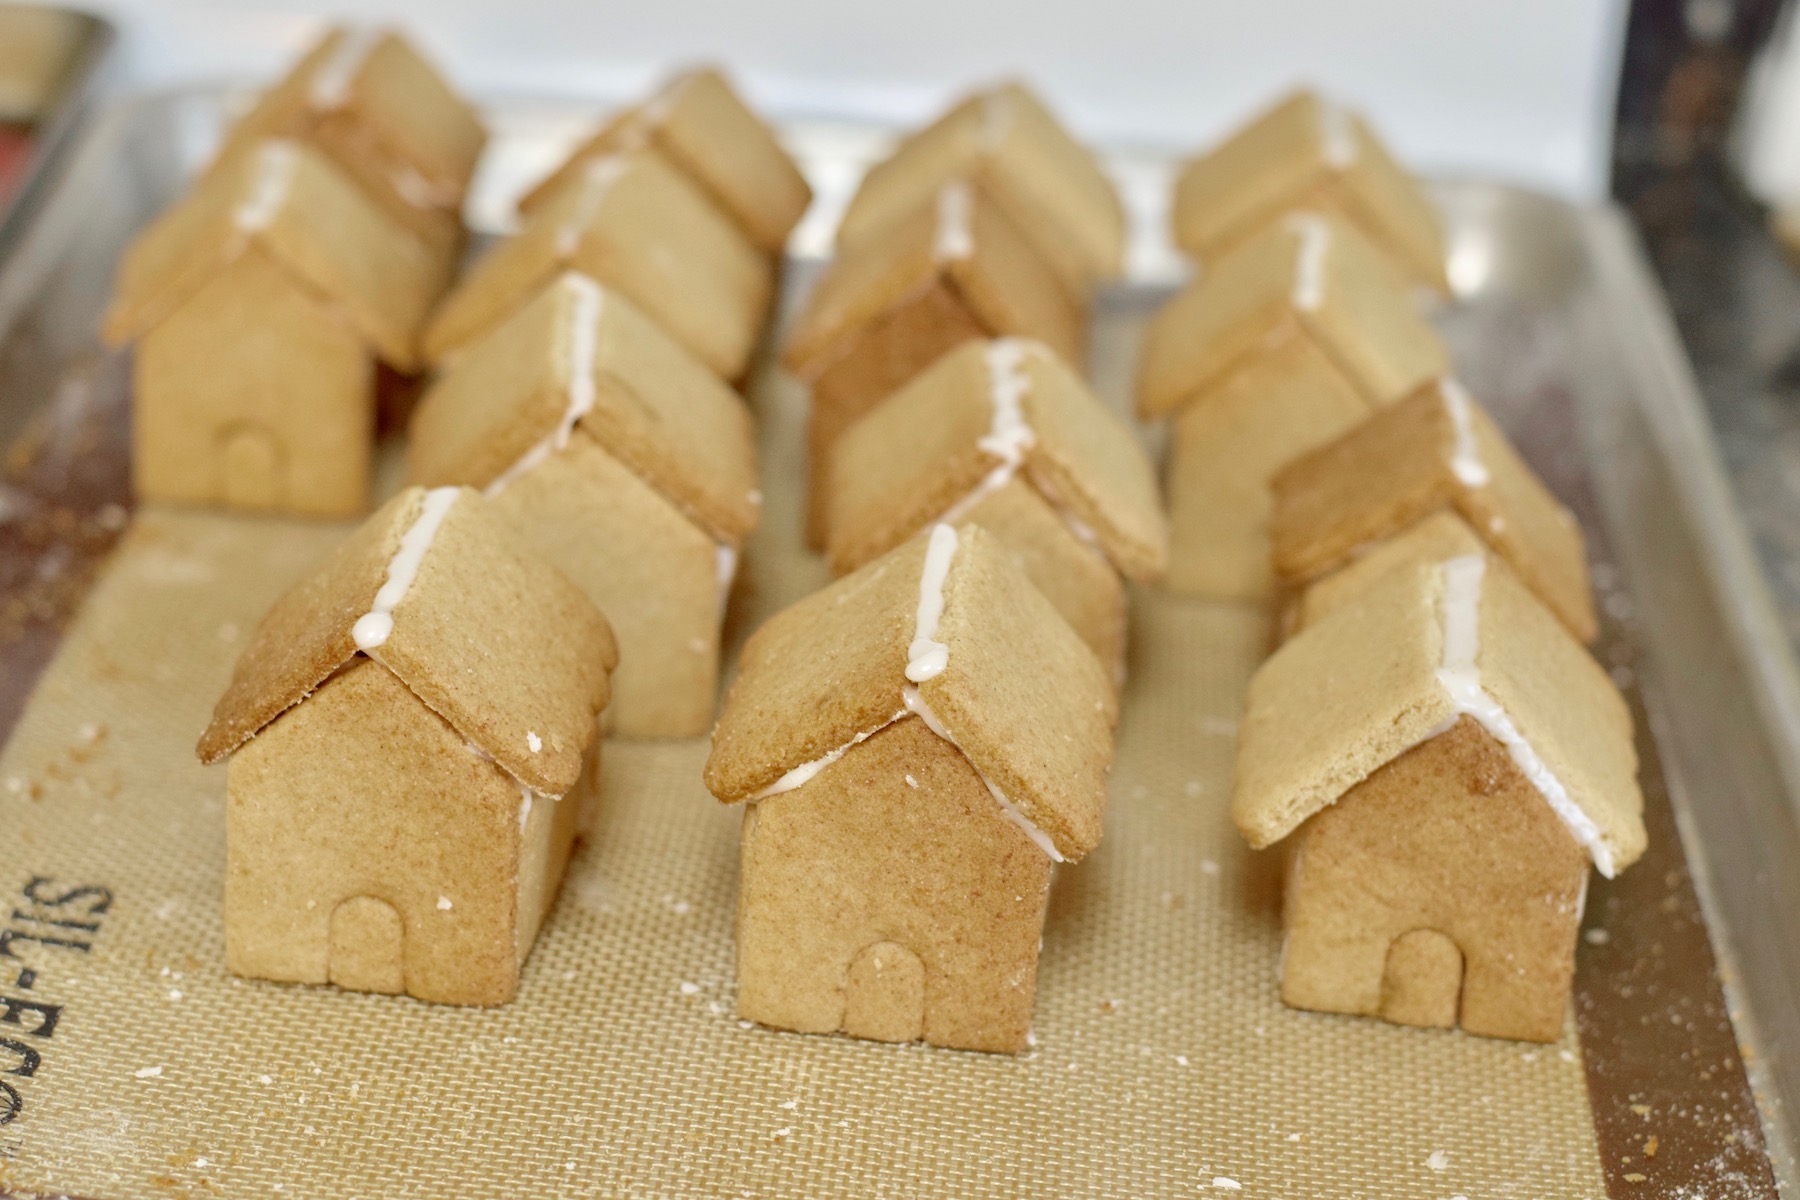 assemble the gingerbread houses